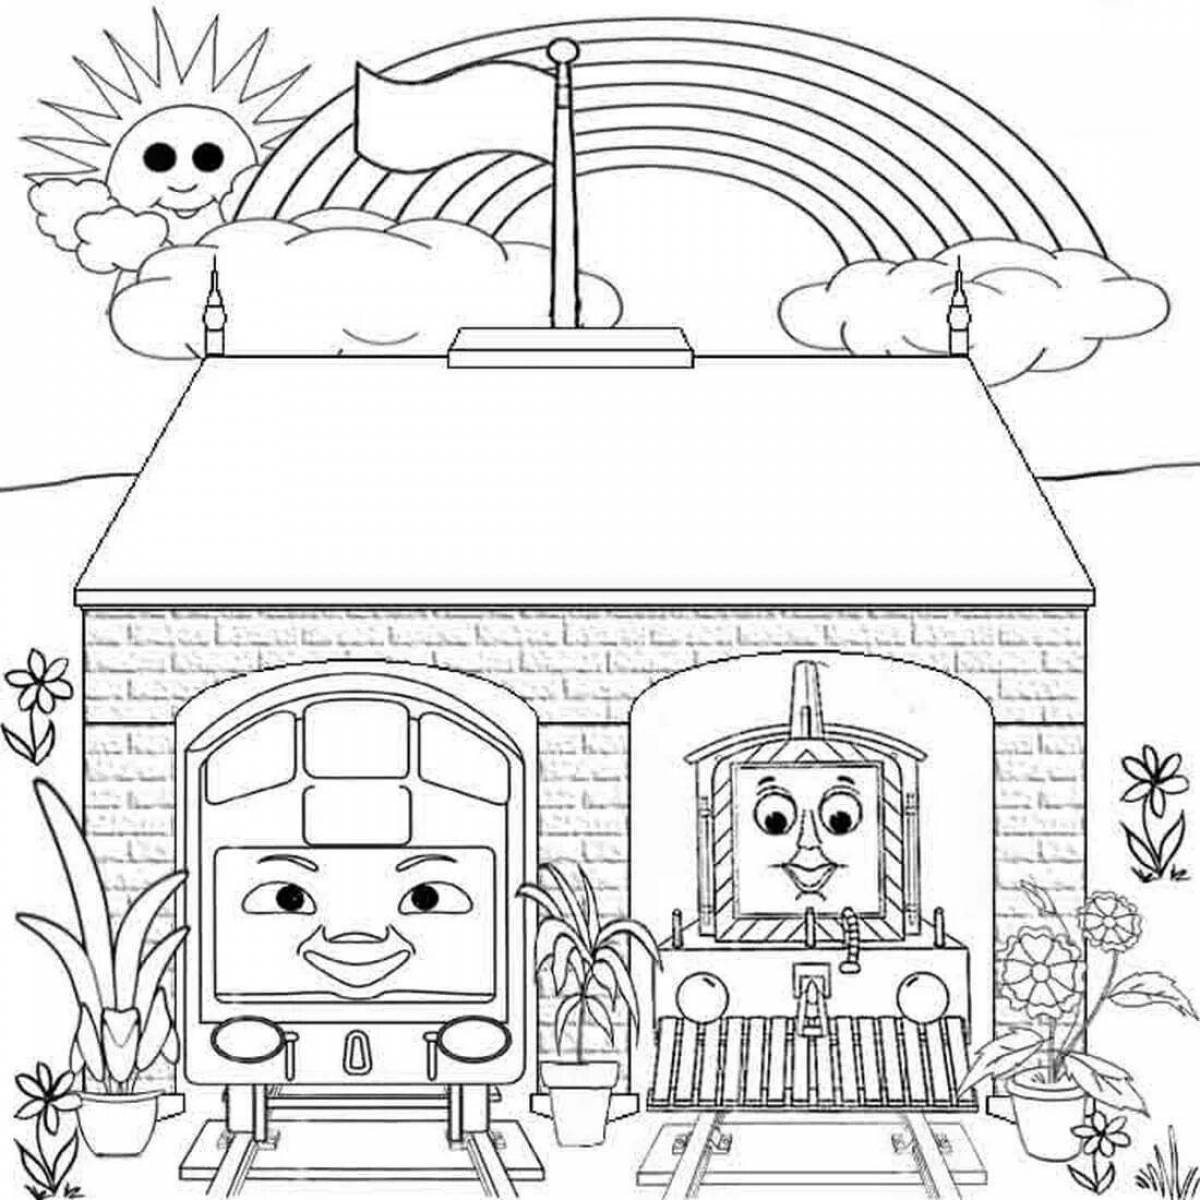 Coloring page nice rainbow house